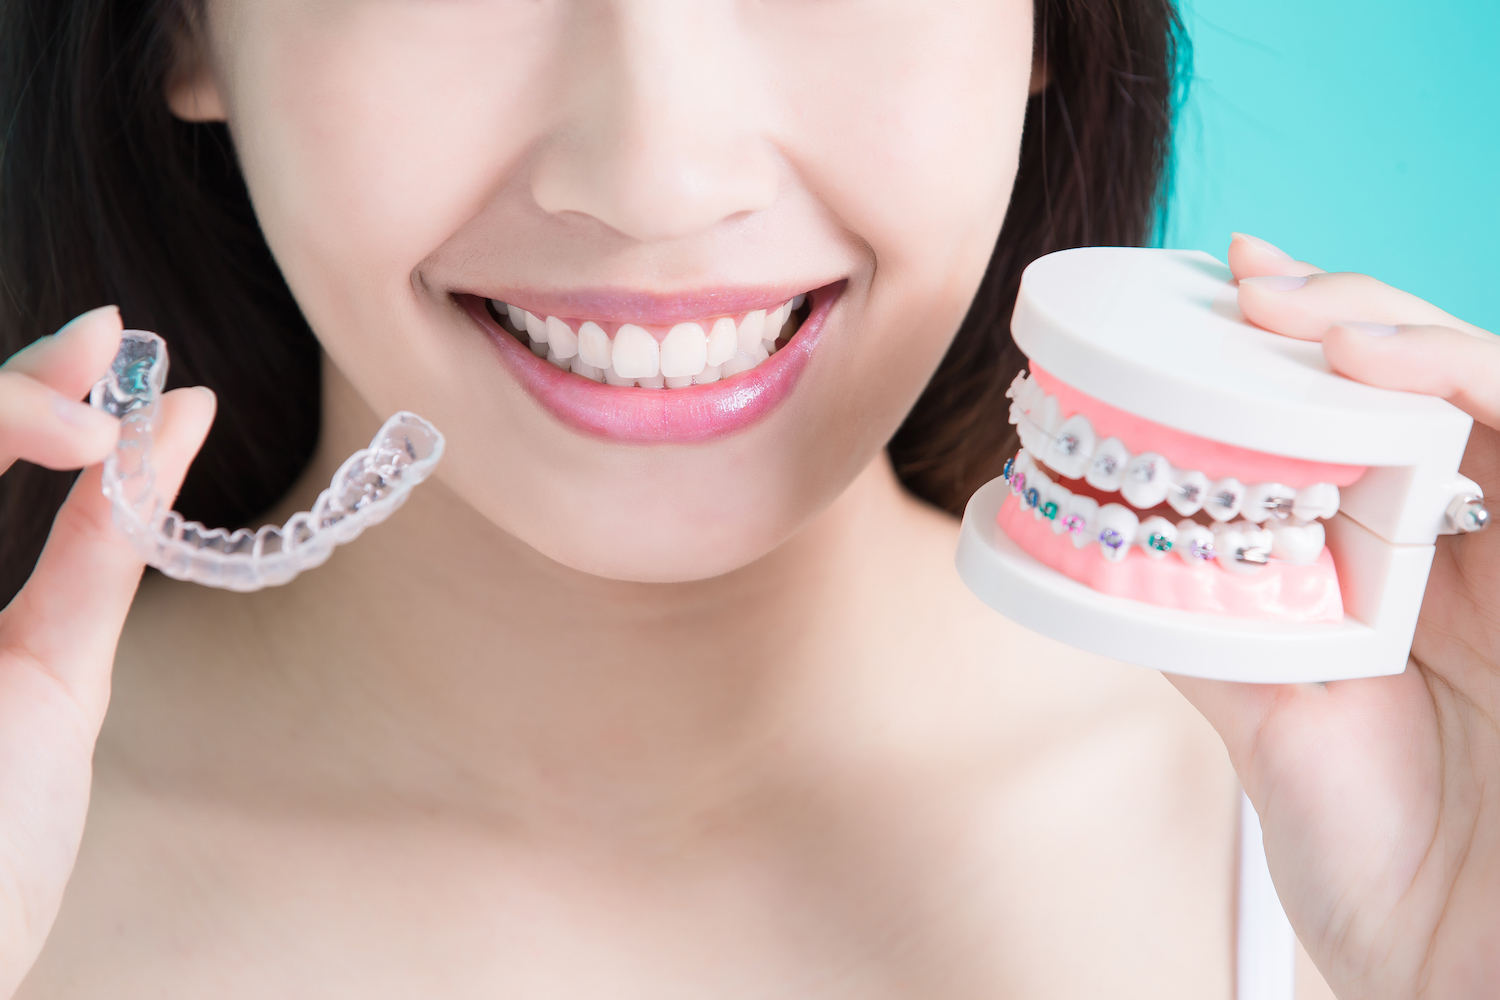 Photograph of woman comparing Invisalign clear aligners and traditional braces.